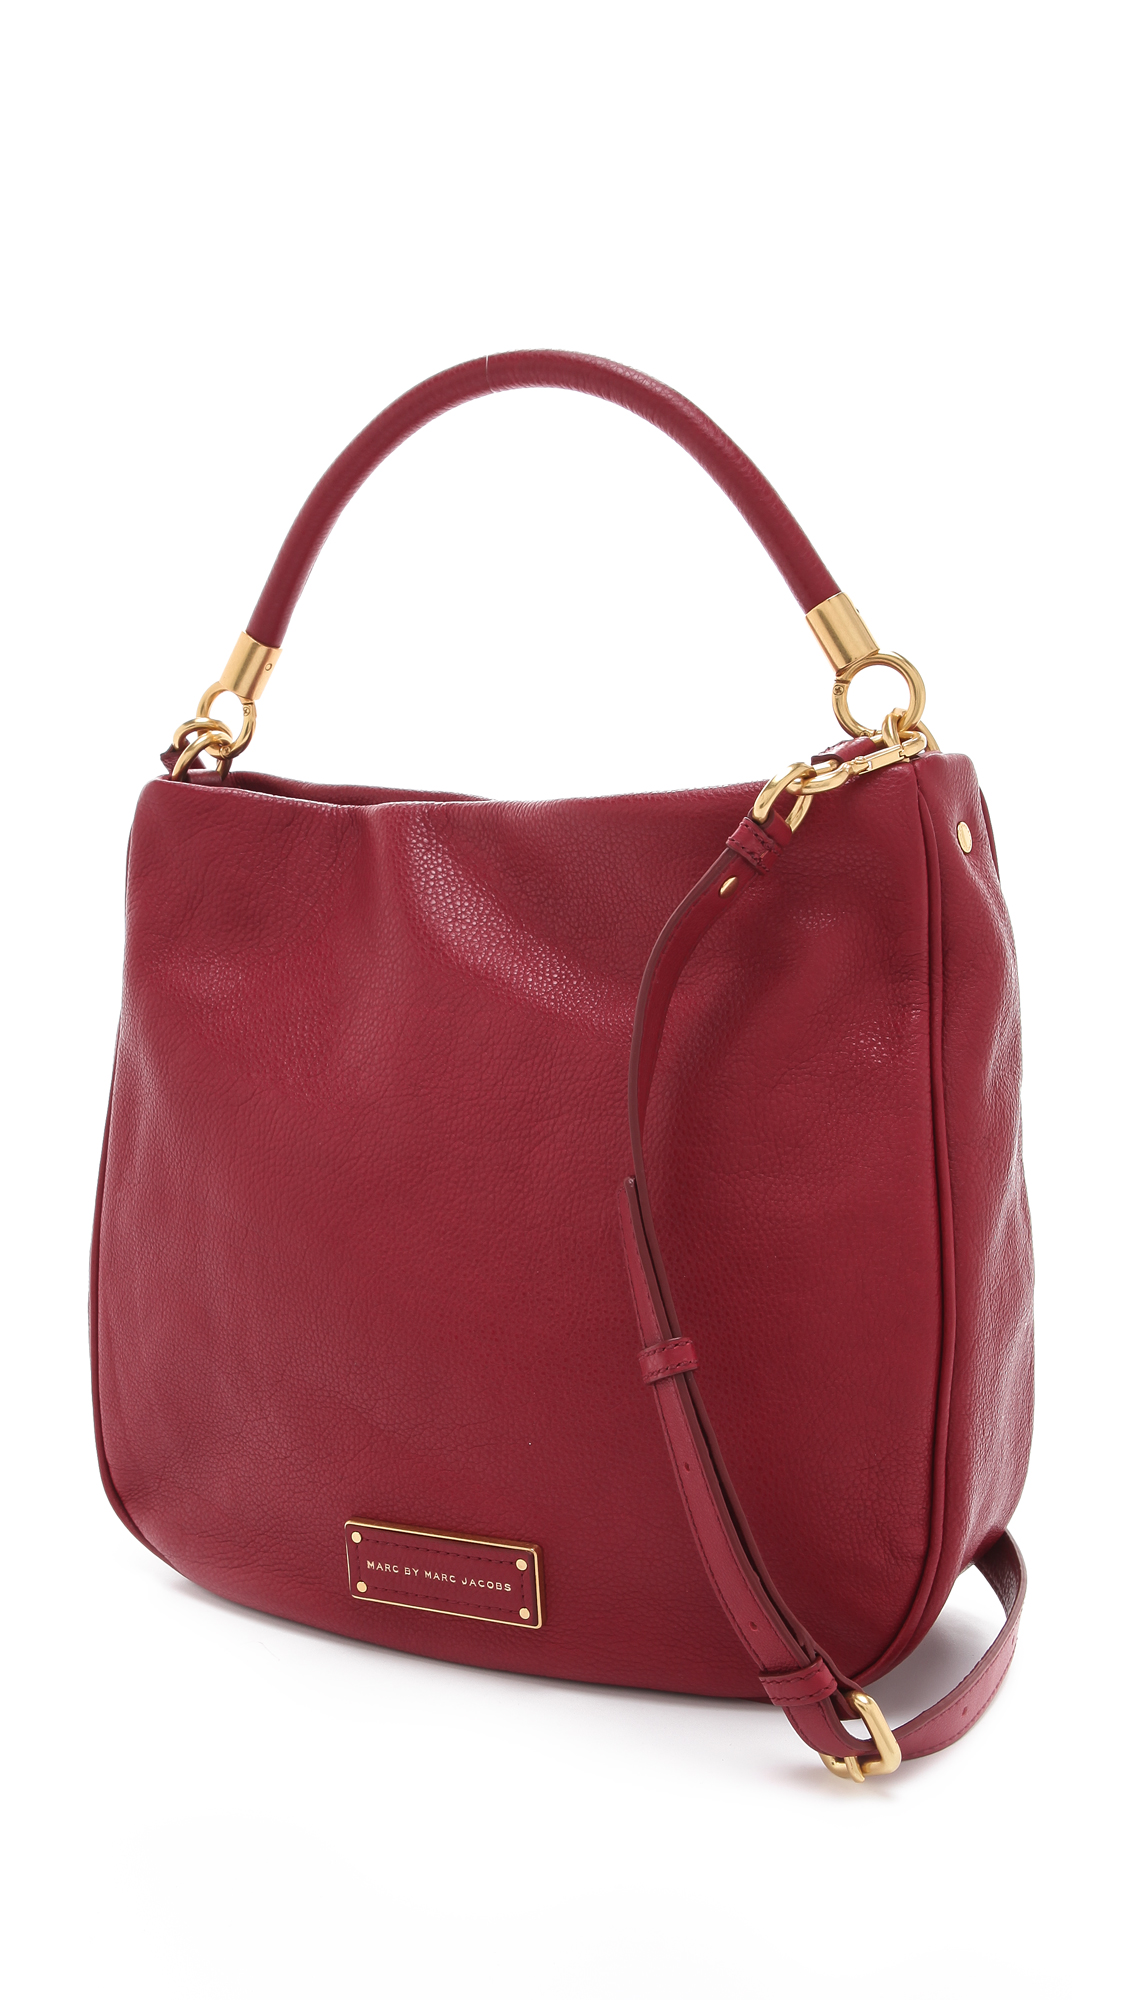 Marc By Marc Jacobs Leather Hobo Bag in Red - Lyst